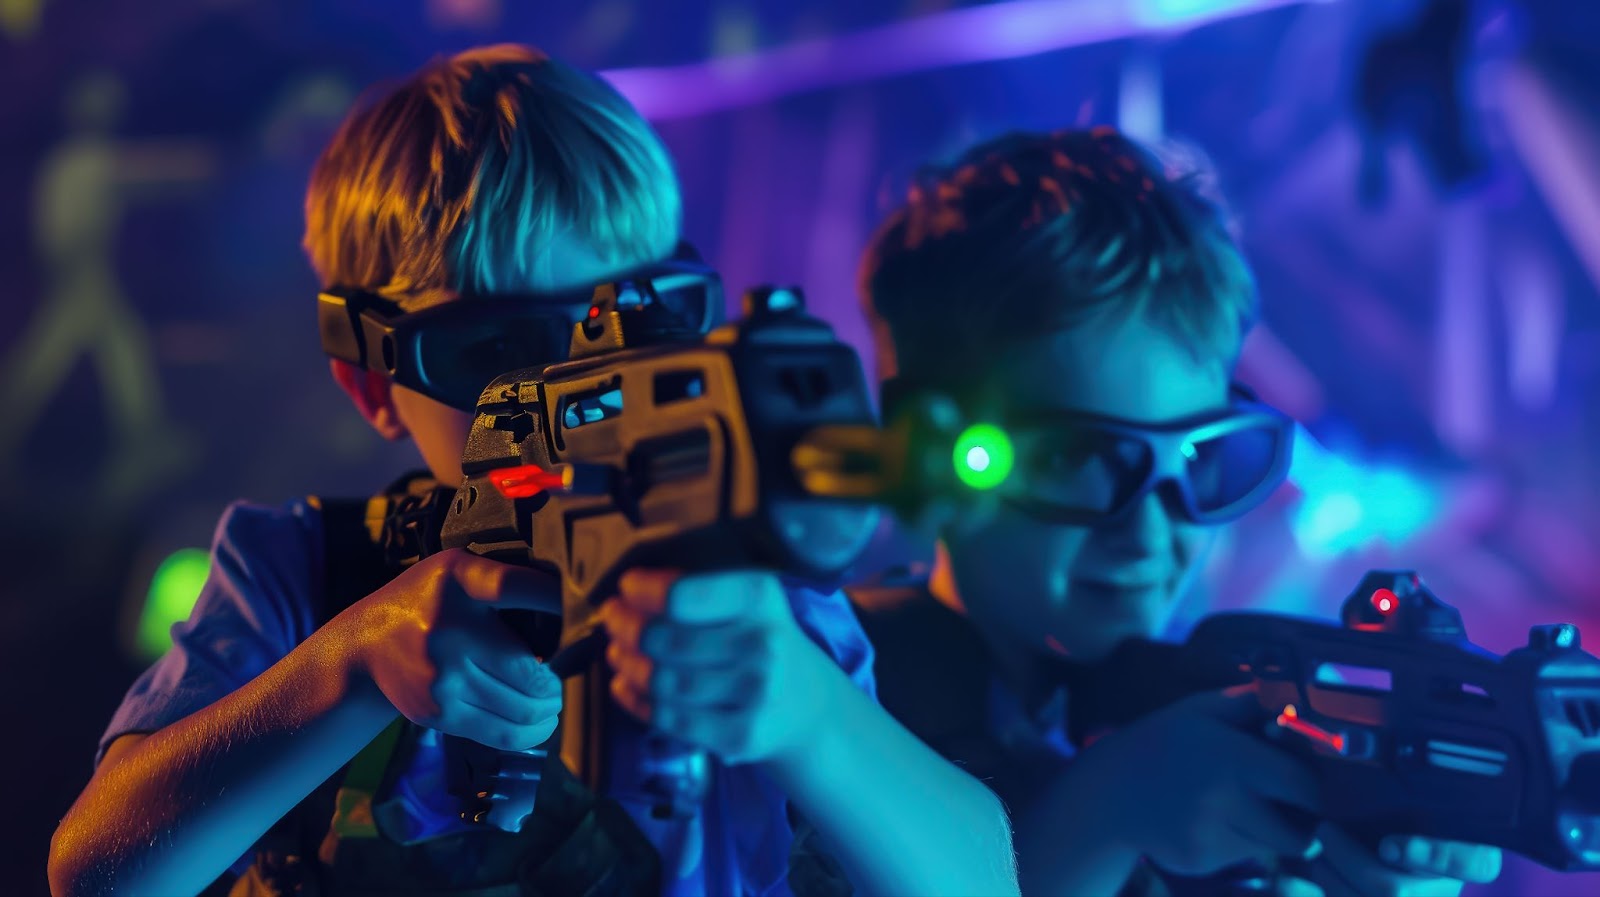 Two young boys holding toy guns in a dark room during a laser tag birthday party